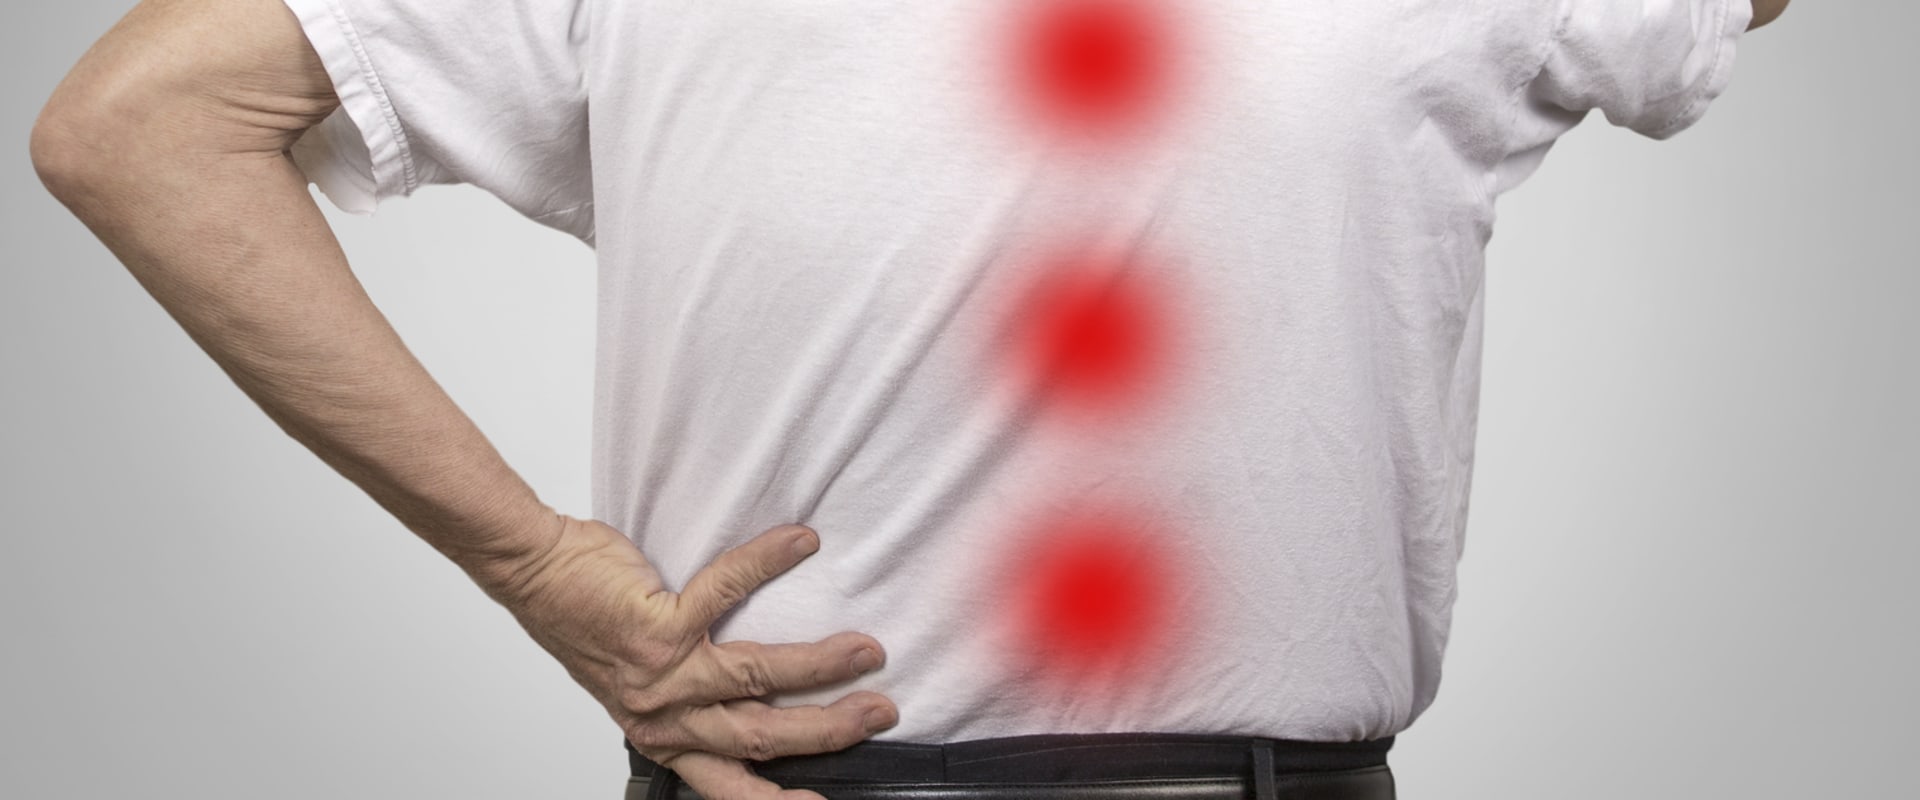 How do you know if a back injury is serious?